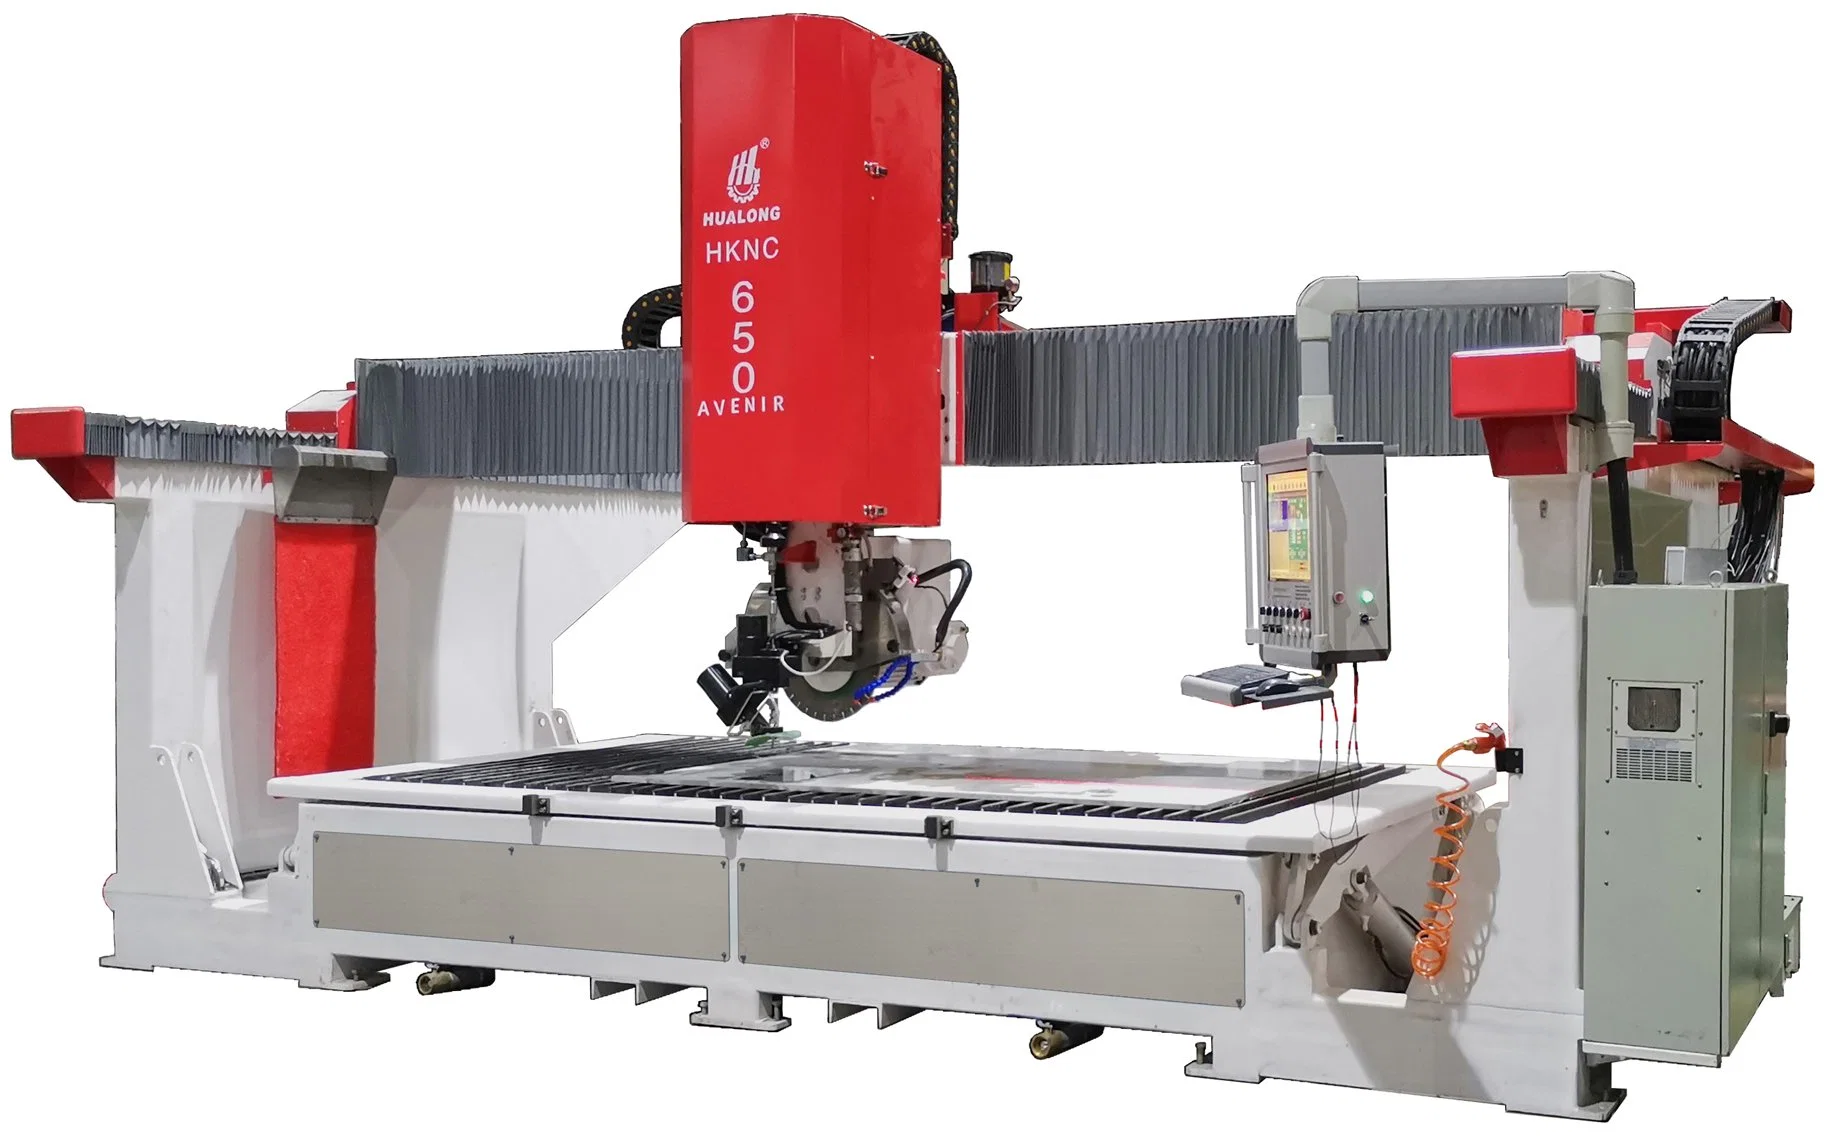 Hualong Stone Machinery 5 Axis CNC Bridge Stone Cutting and Milling Machine with Waterjet for Granite Marble Slab with Dirll Router Bits Diamond Saw Blade